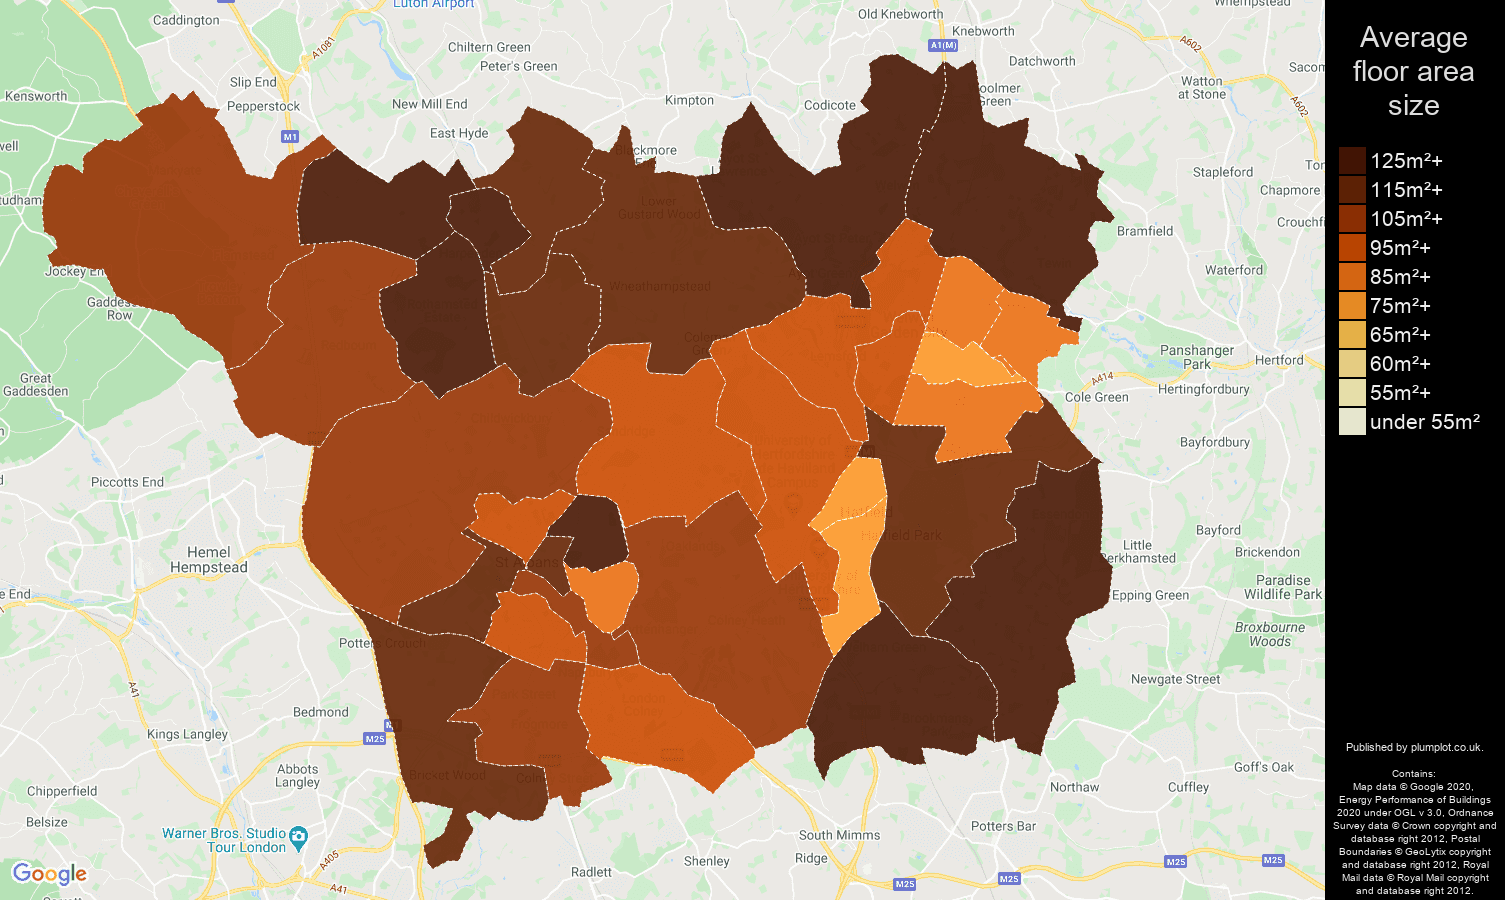 St Albans map of average floor area size of houses